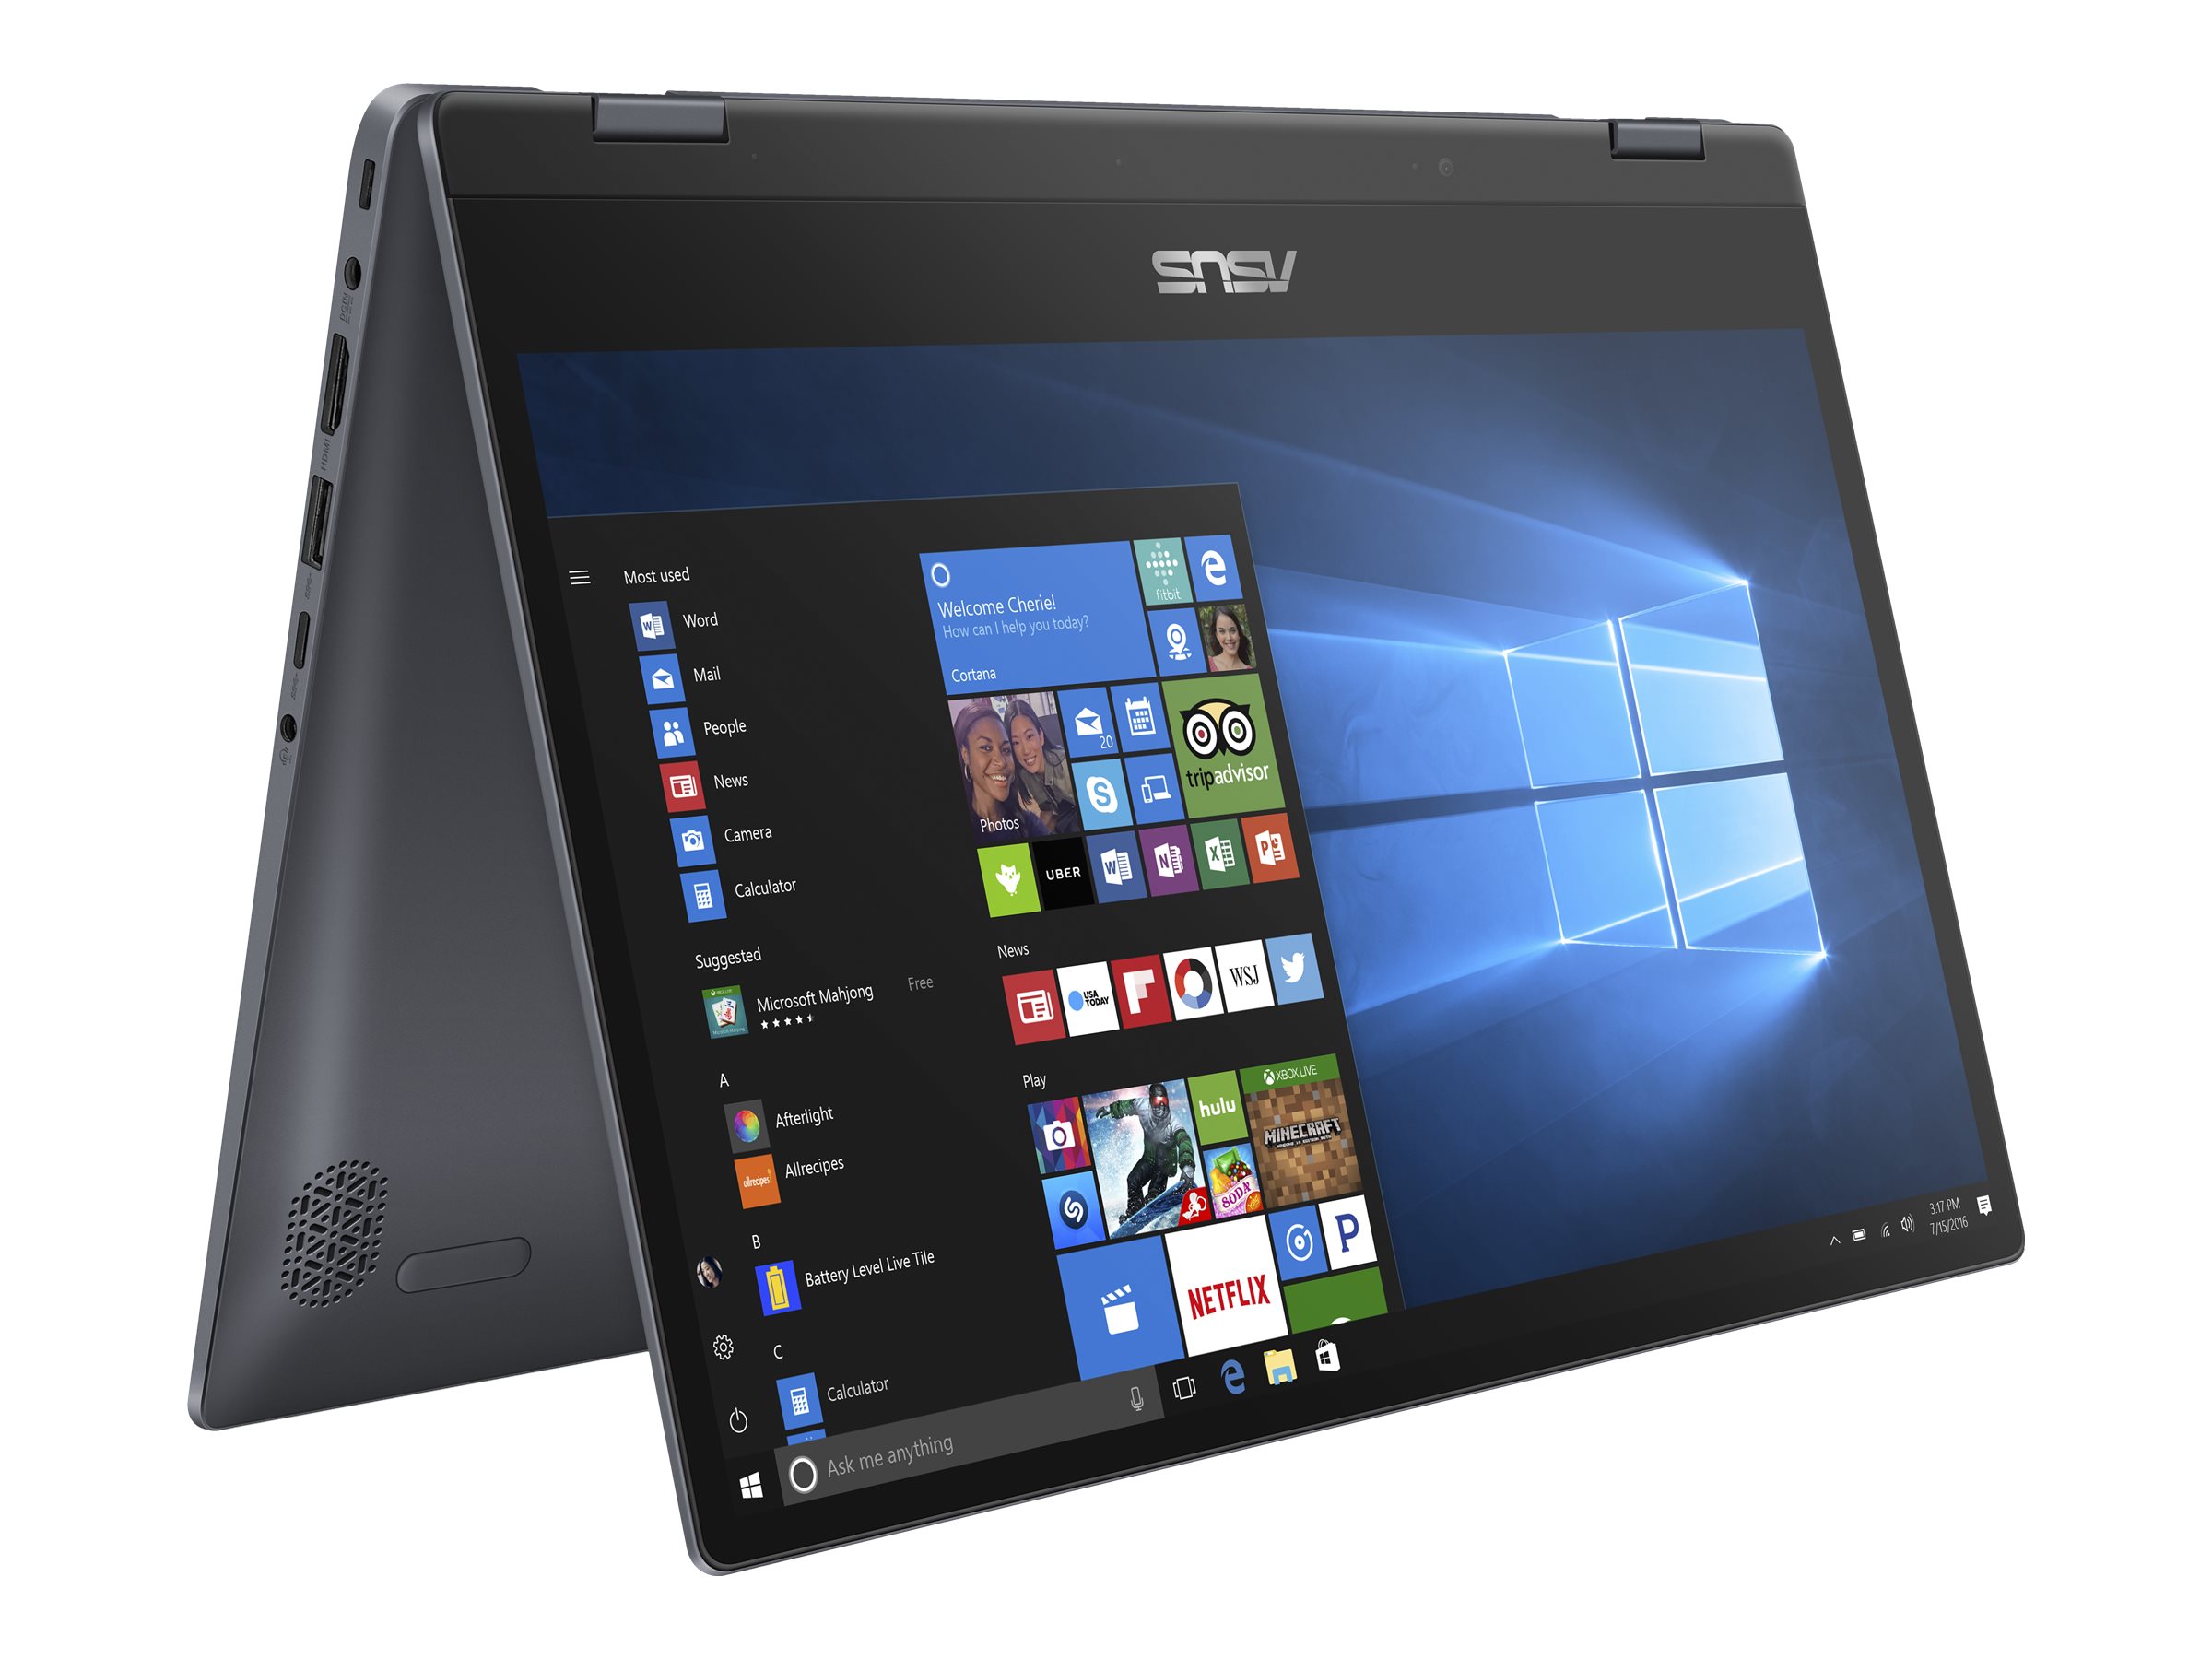 ASUS VivoBook Flip TP412 14" FHD Touch 2-in-1, Intel Core i3-8145U, Intel UHD Graphics 620, 4GB RAM, 128GB SSD, Windows 10 in S Mode, Star Grey, TP412FA-OS31T - image 1 of 14